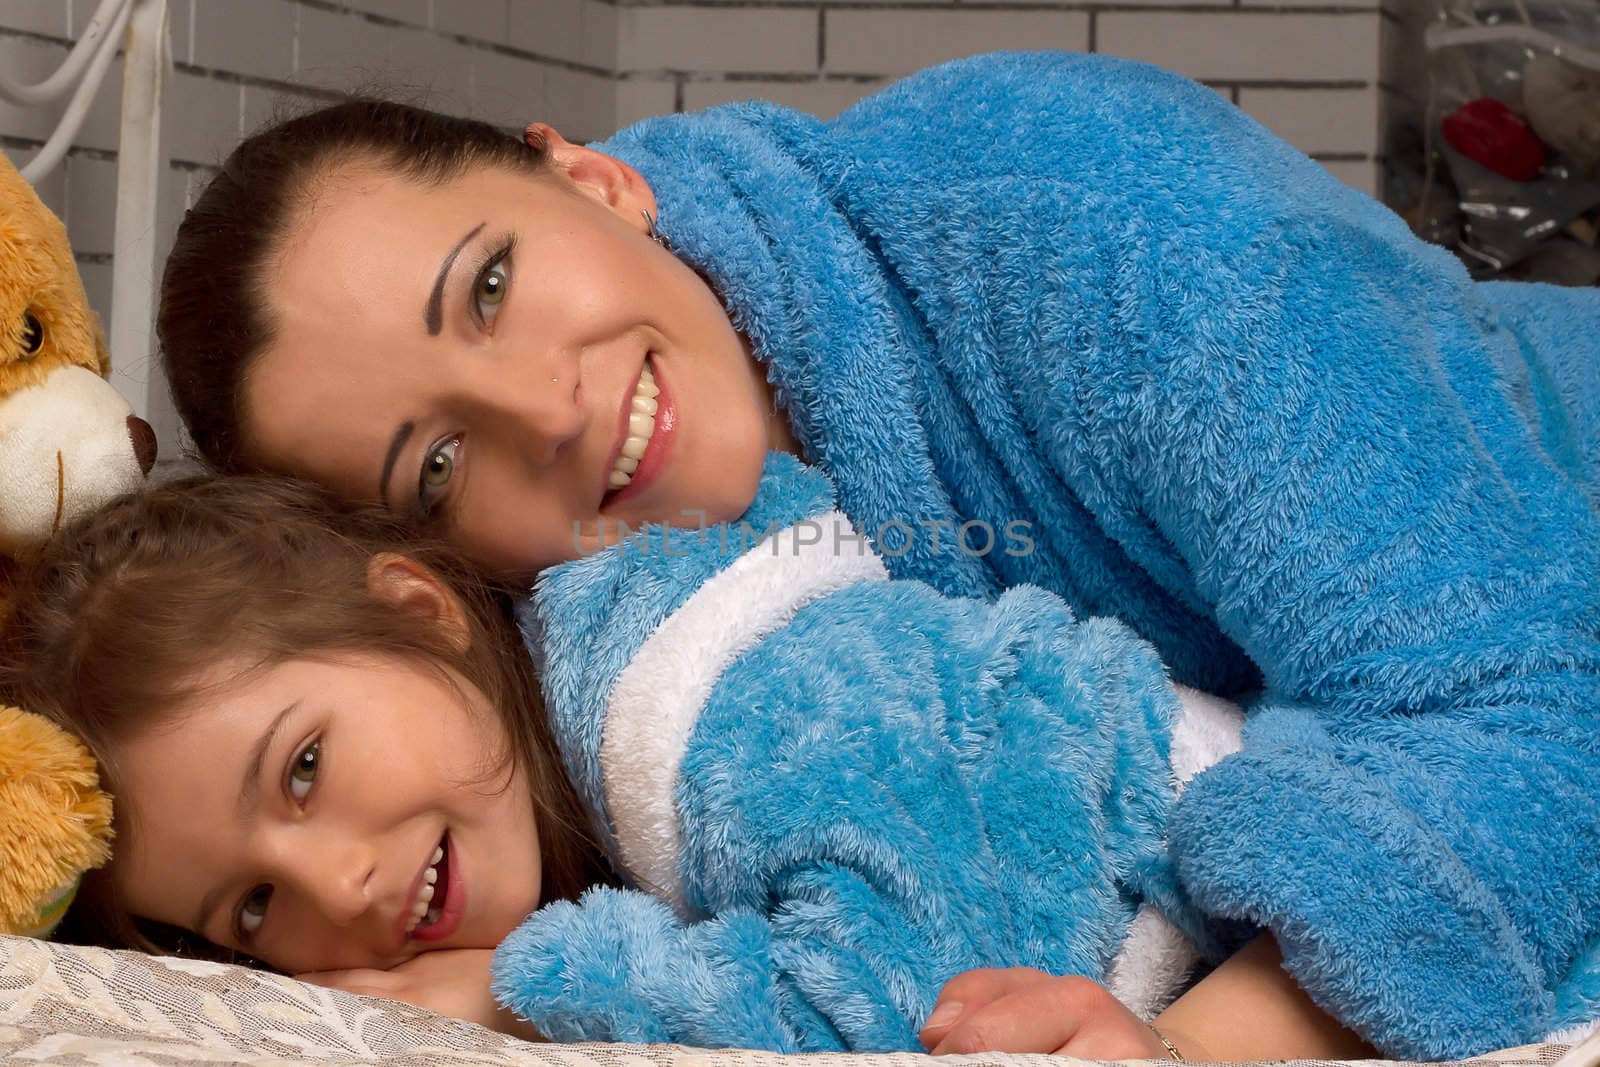 Mom and daughter in the same blue terry robe lying on the bed